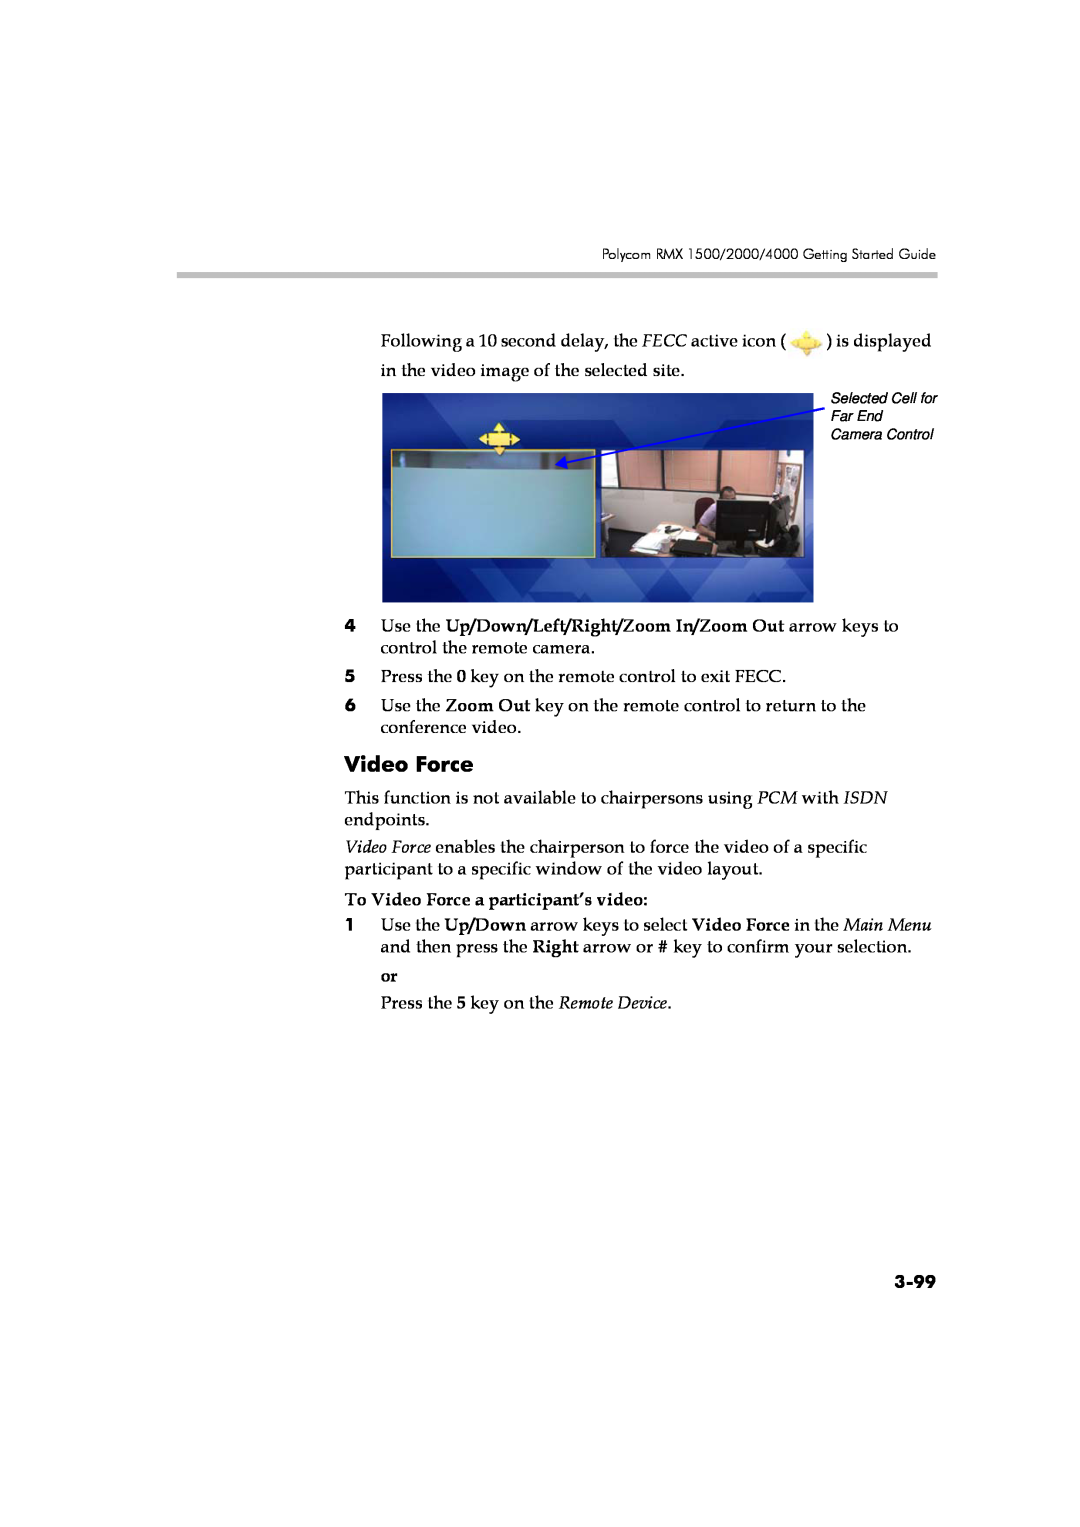 Polycom DOC2560A manual To Video Force a participant’s video, 3-99 